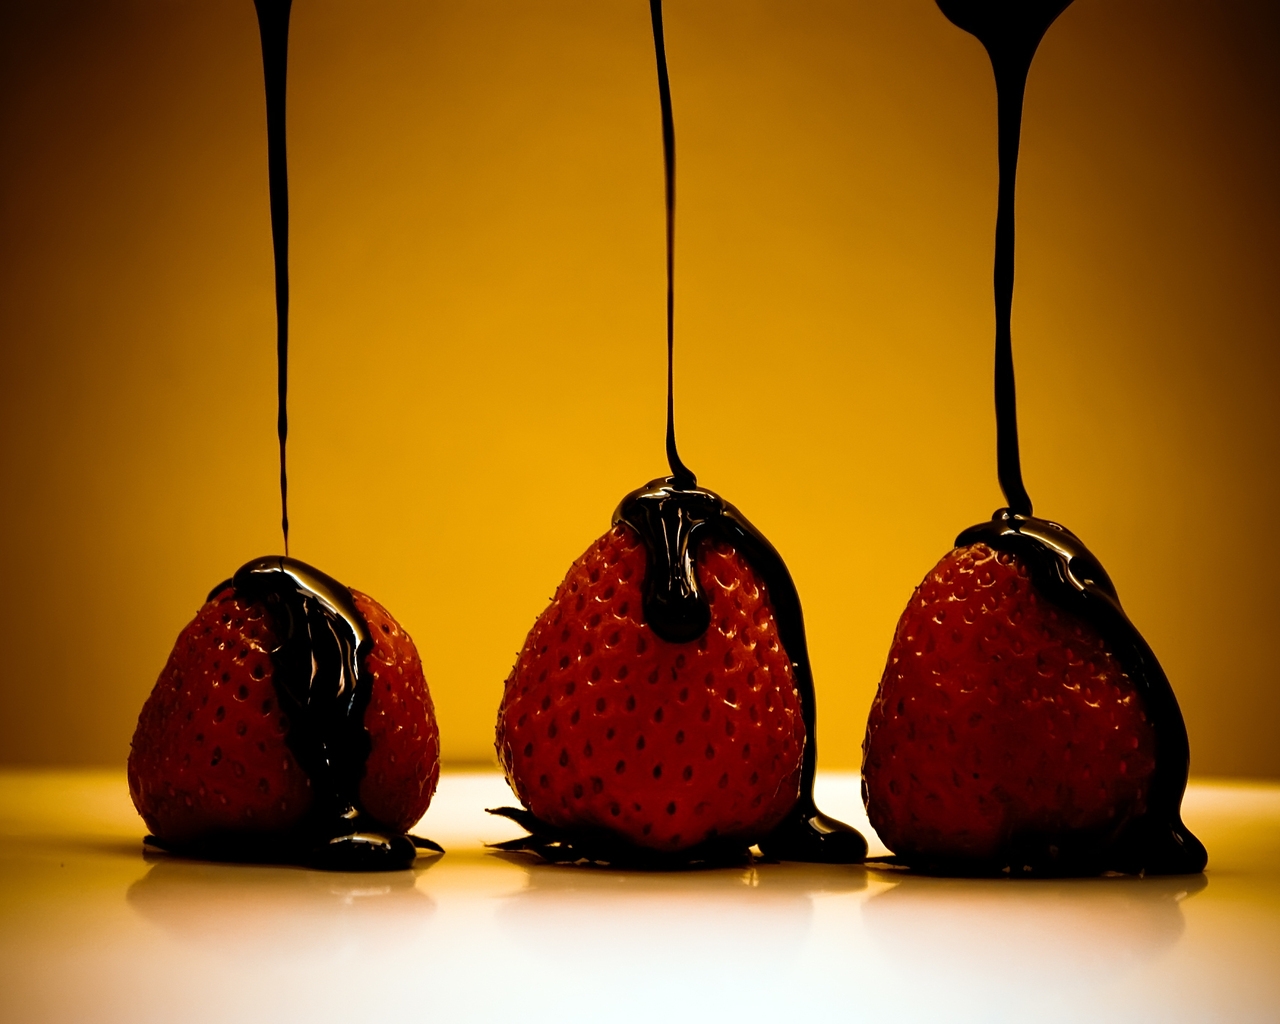 Strawberry and Chocolate for 1280 x 1024 resolution